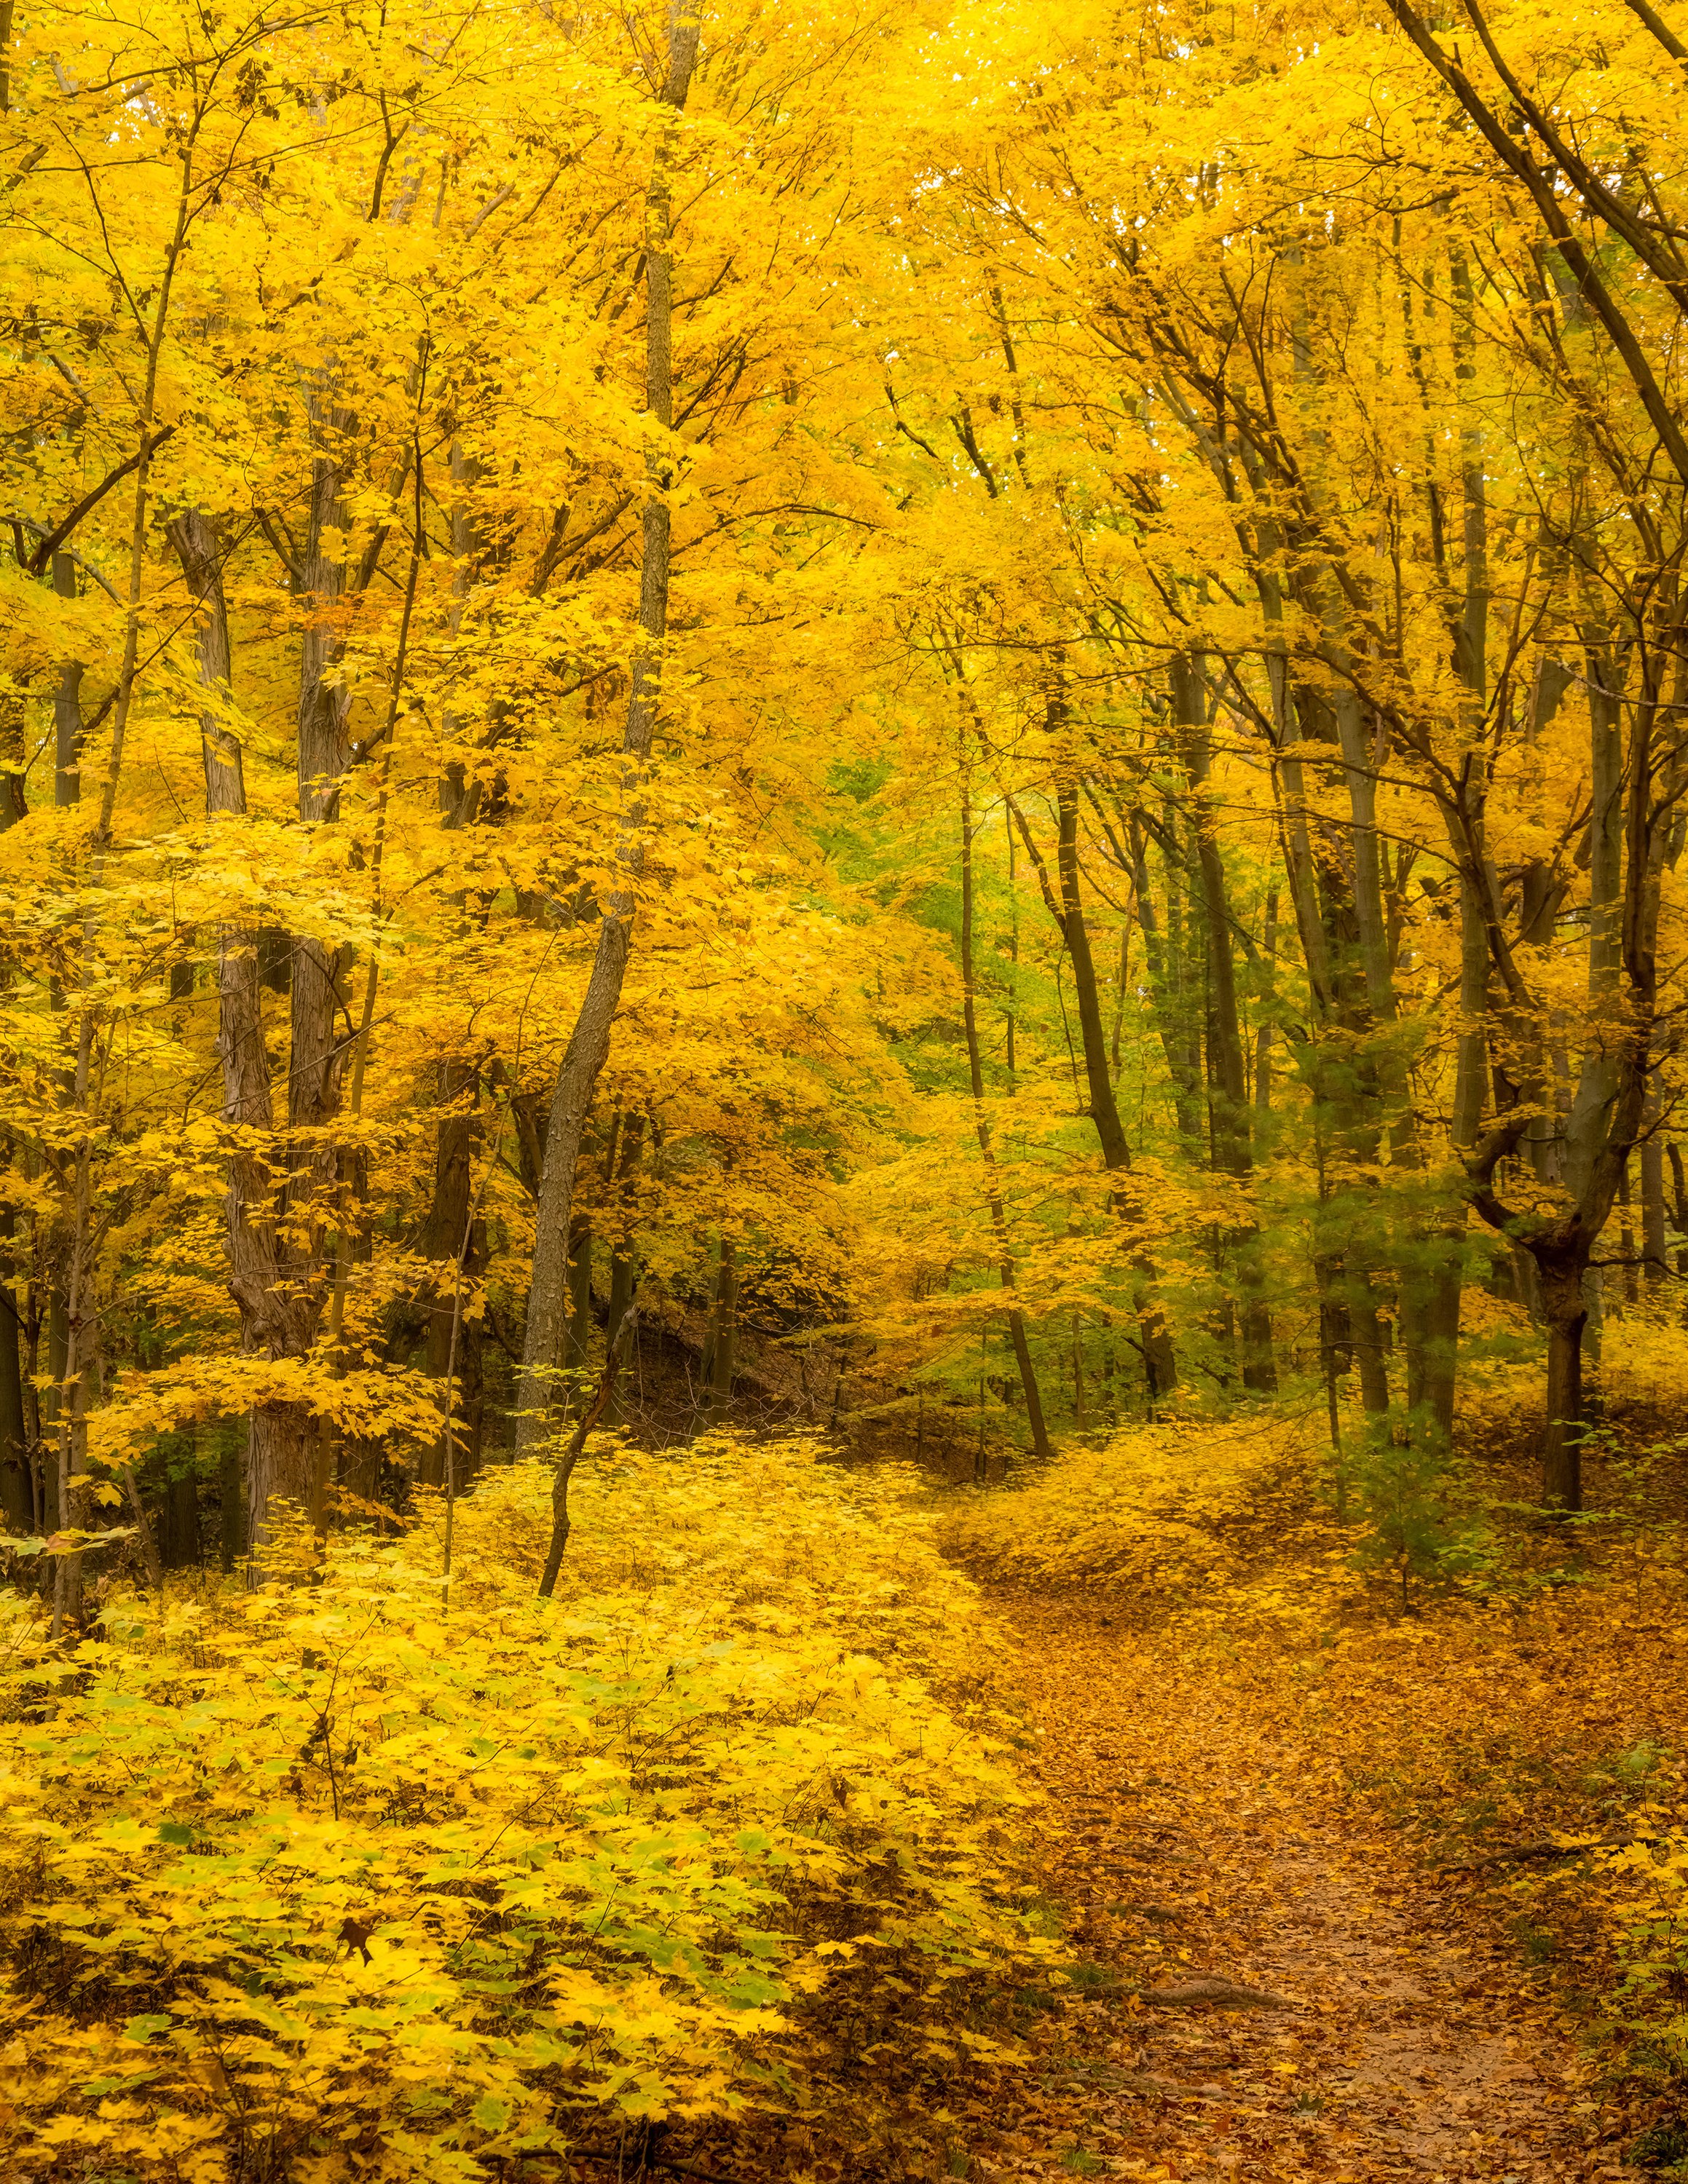  The golden hues of Autumn in the Saugatuck woods, MI 